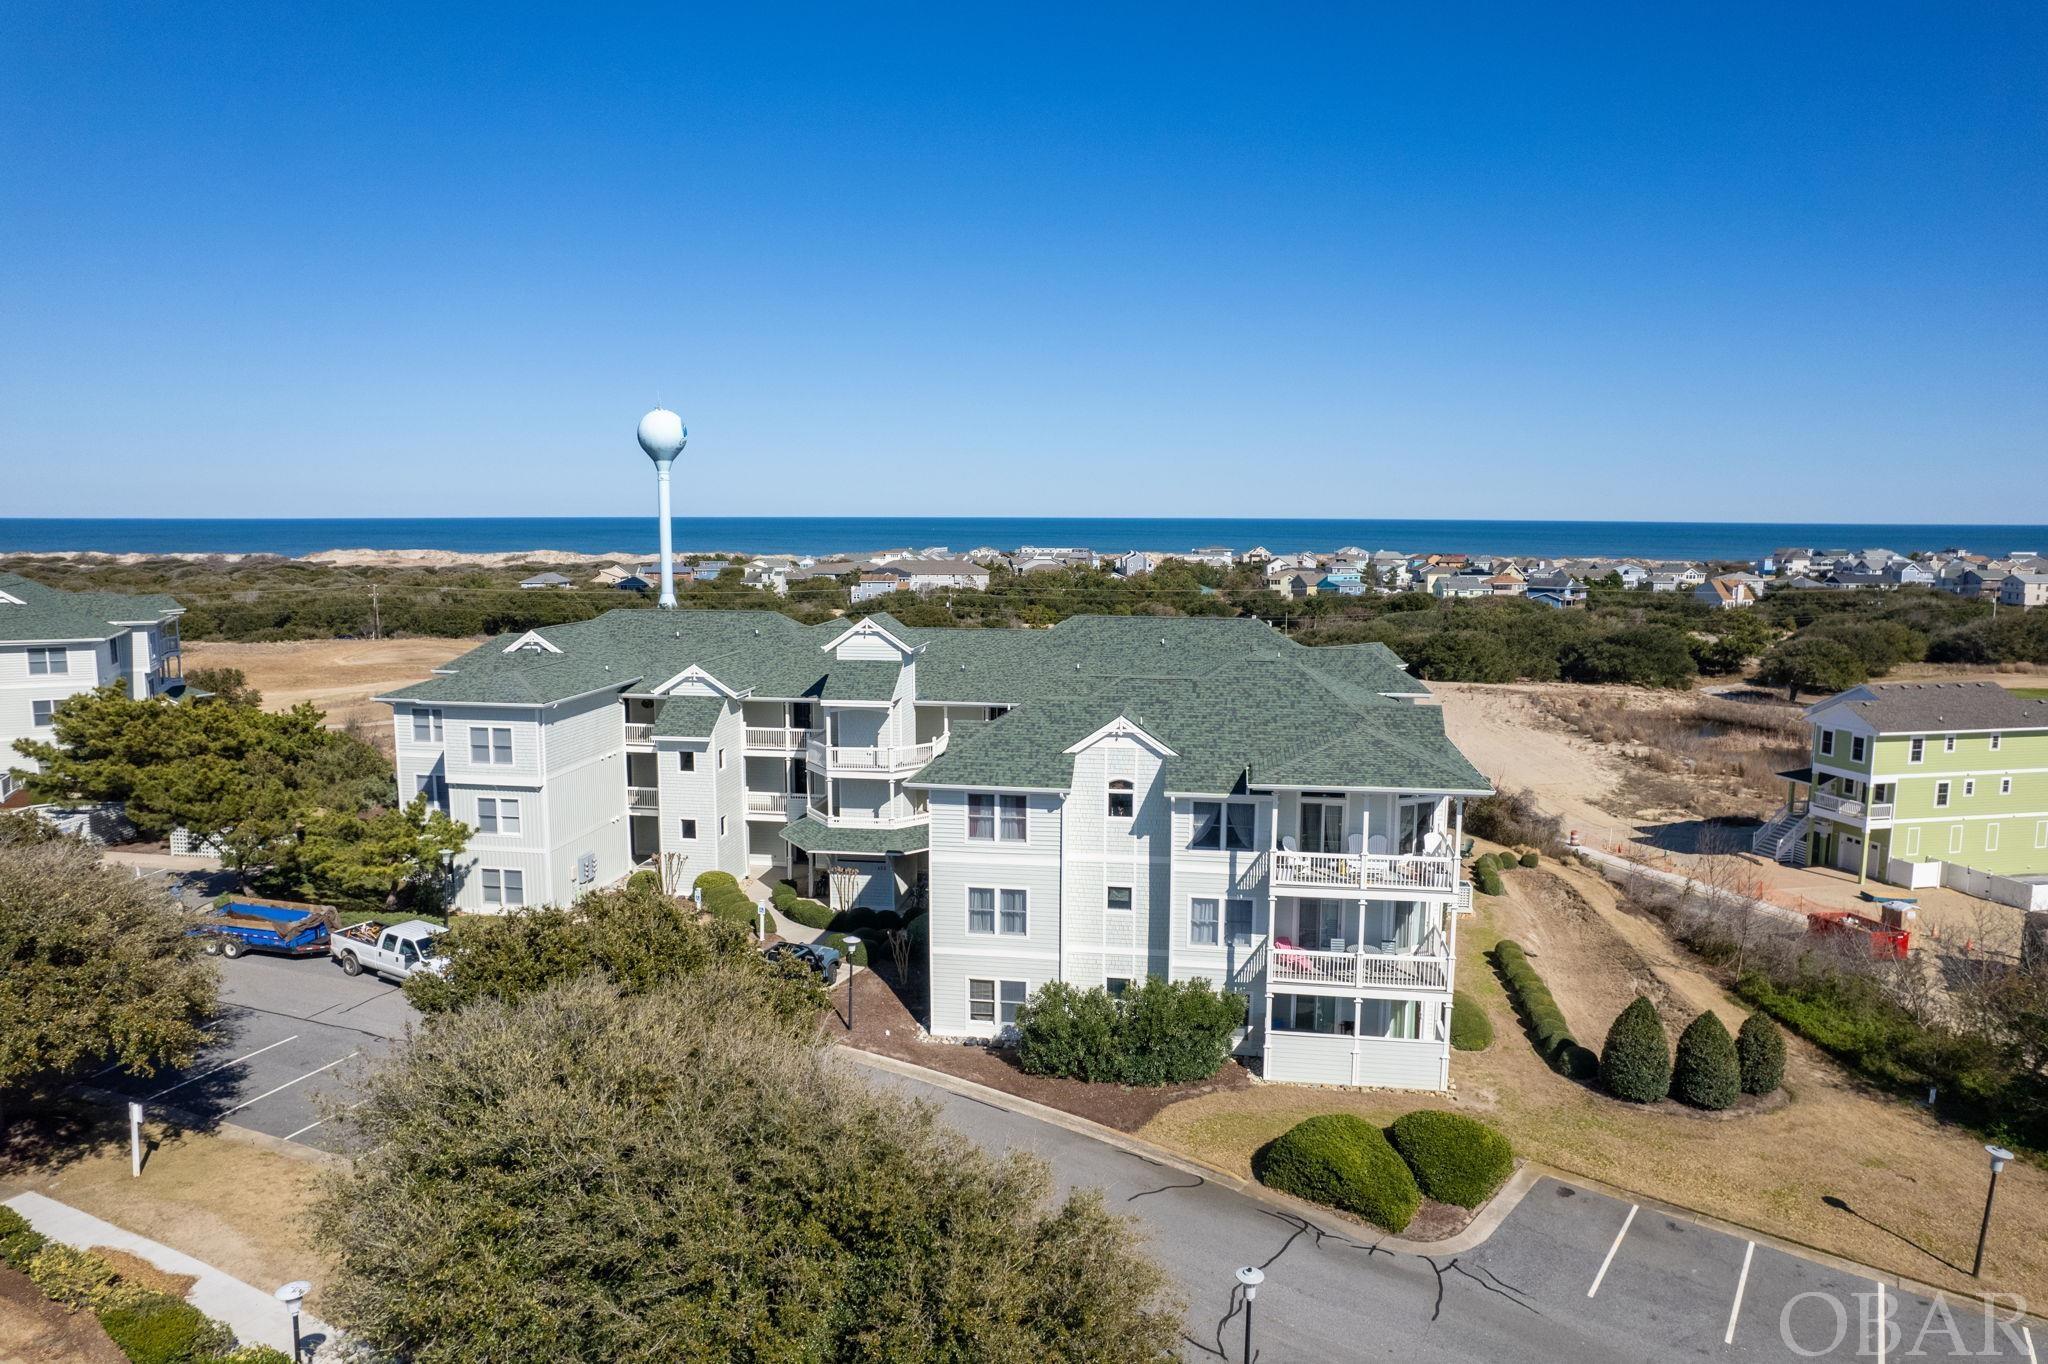 Pristine Villa perched atop one of the highest elevations in The Club. The beautifully maintained and spacious 2 bedroom corner unit home is located within the sought after community of Windswept Ridge Villas in the Currituck Club. Ample light pours in from 2 outdoor patios from this 2nd floor unit. "Postcard Perfect" is perfectly positioned to provide views of the beautiful blue waters of the Atlantic Ocean and vistas of the Rees Jones designed golf course.  The home offers newer living room furniture, curtains, flat screen tv's, décor, mattresses, bedding and interior paint. 2018-2019 new interior air handler (RA Hoy). 2022 New dishwasher. 2024 New refrigerator with ice maker. With ample-sized bedrooms and an open floor plan, the home lives large! The amenity-rich community of the Currituck Club provides enhanced fun & entertainment: Clubhouse, several private community pools, tennis courts, fitness center, playground and beach trolley services! With elevator serving all levels of the building, this villa checks all the boxes! No detail overlooked in this impressive community and property. Recent updates to the building include: new roof in 2018, full exterior paint and siding repairs in 2023, and new gutters in 2023.